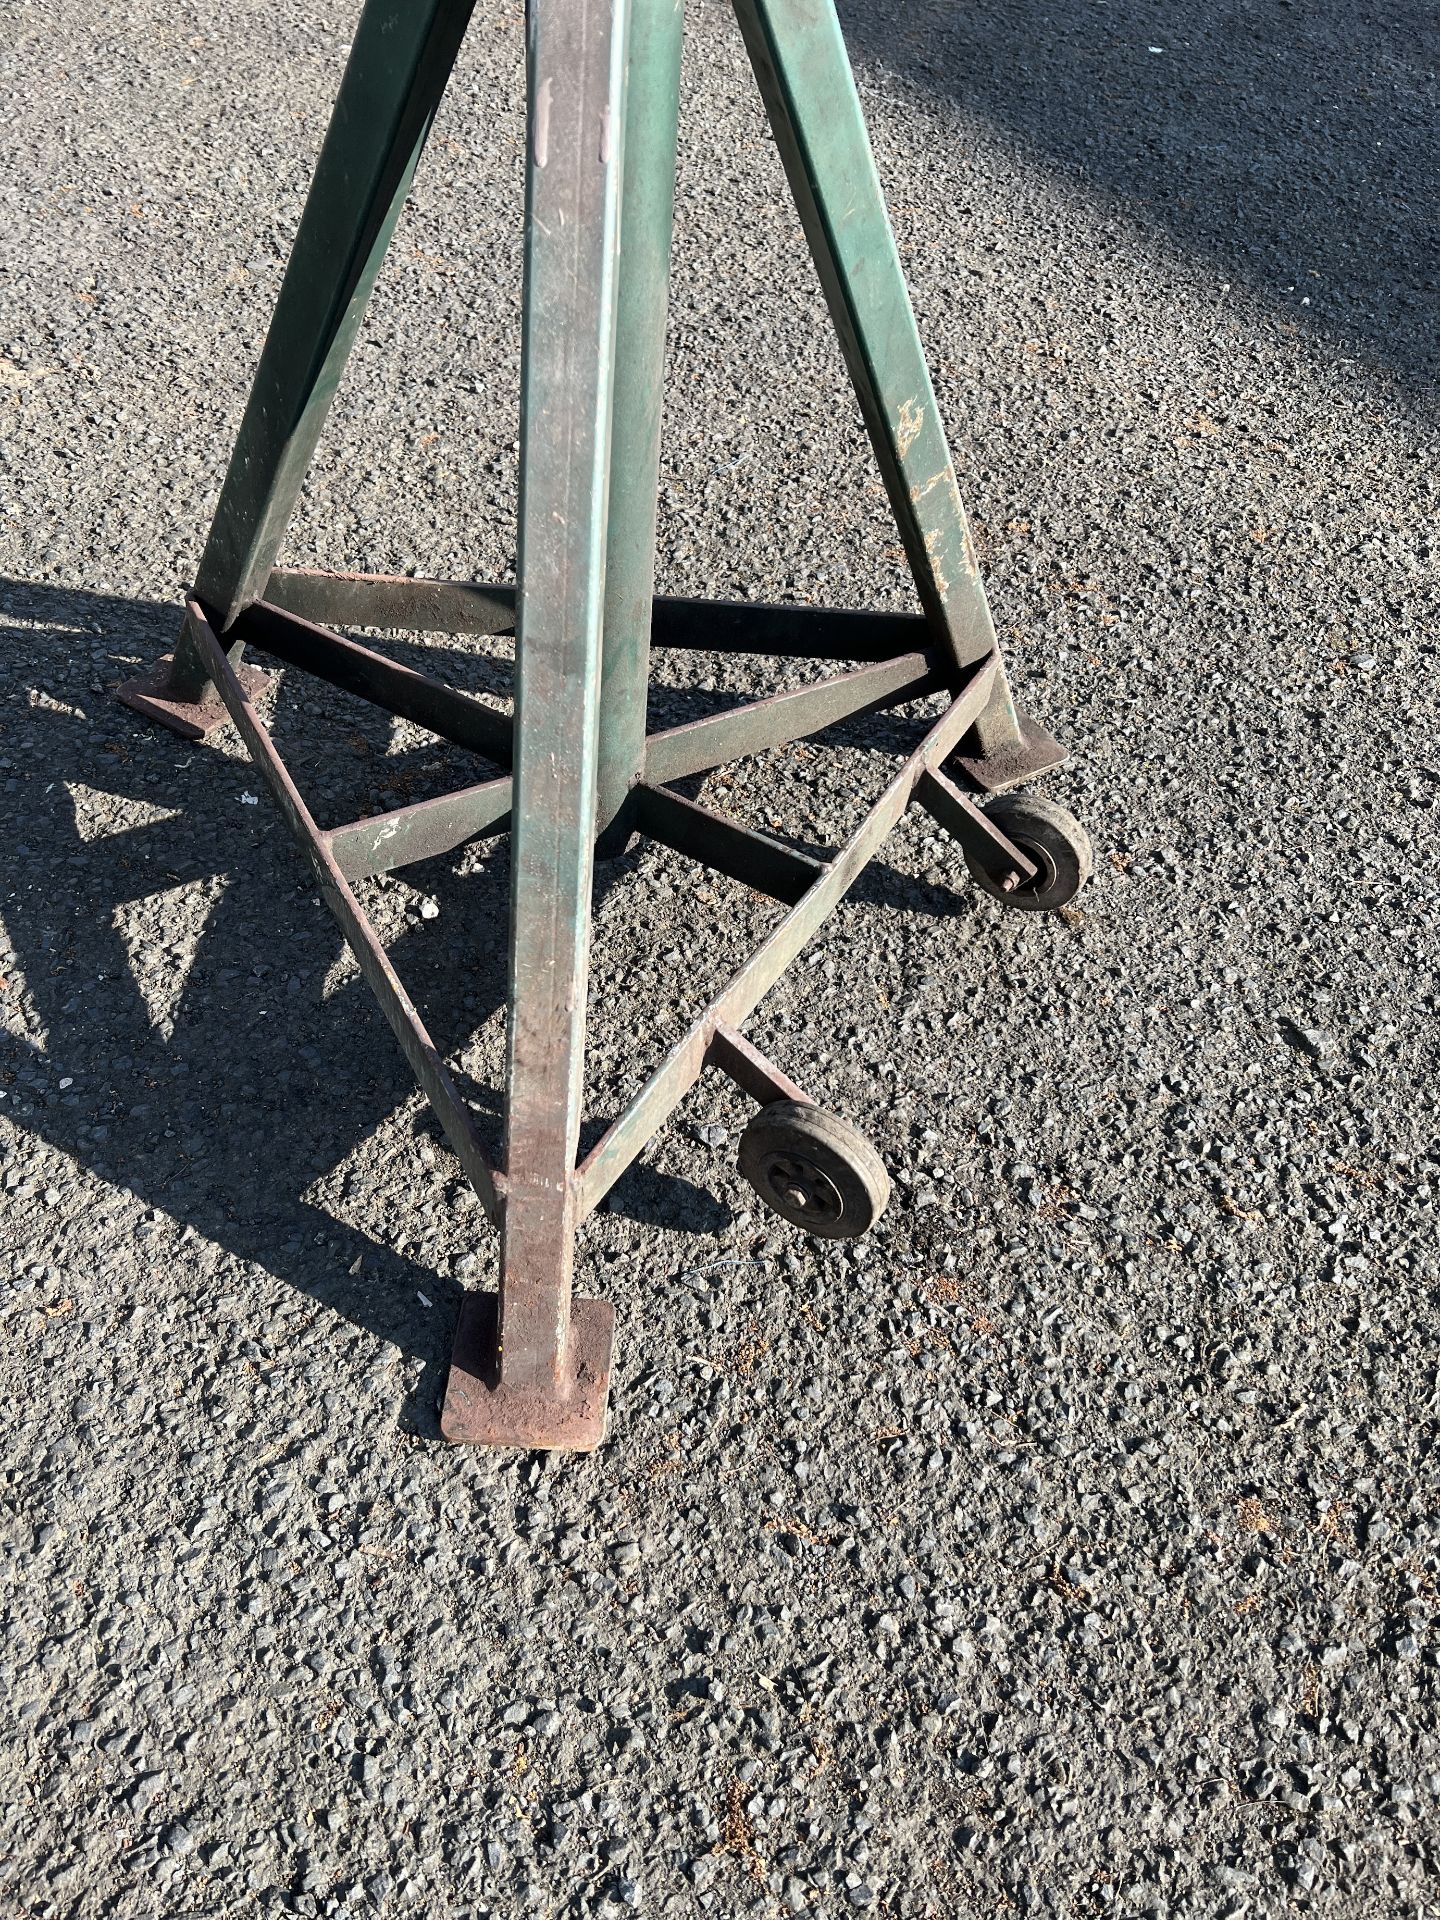 Pair of Wheeled Heavy Duty Steel 7.5 Tonne Axle Stands. Located at Unit 1 Walsall WS2 8AU. - Image 8 of 16